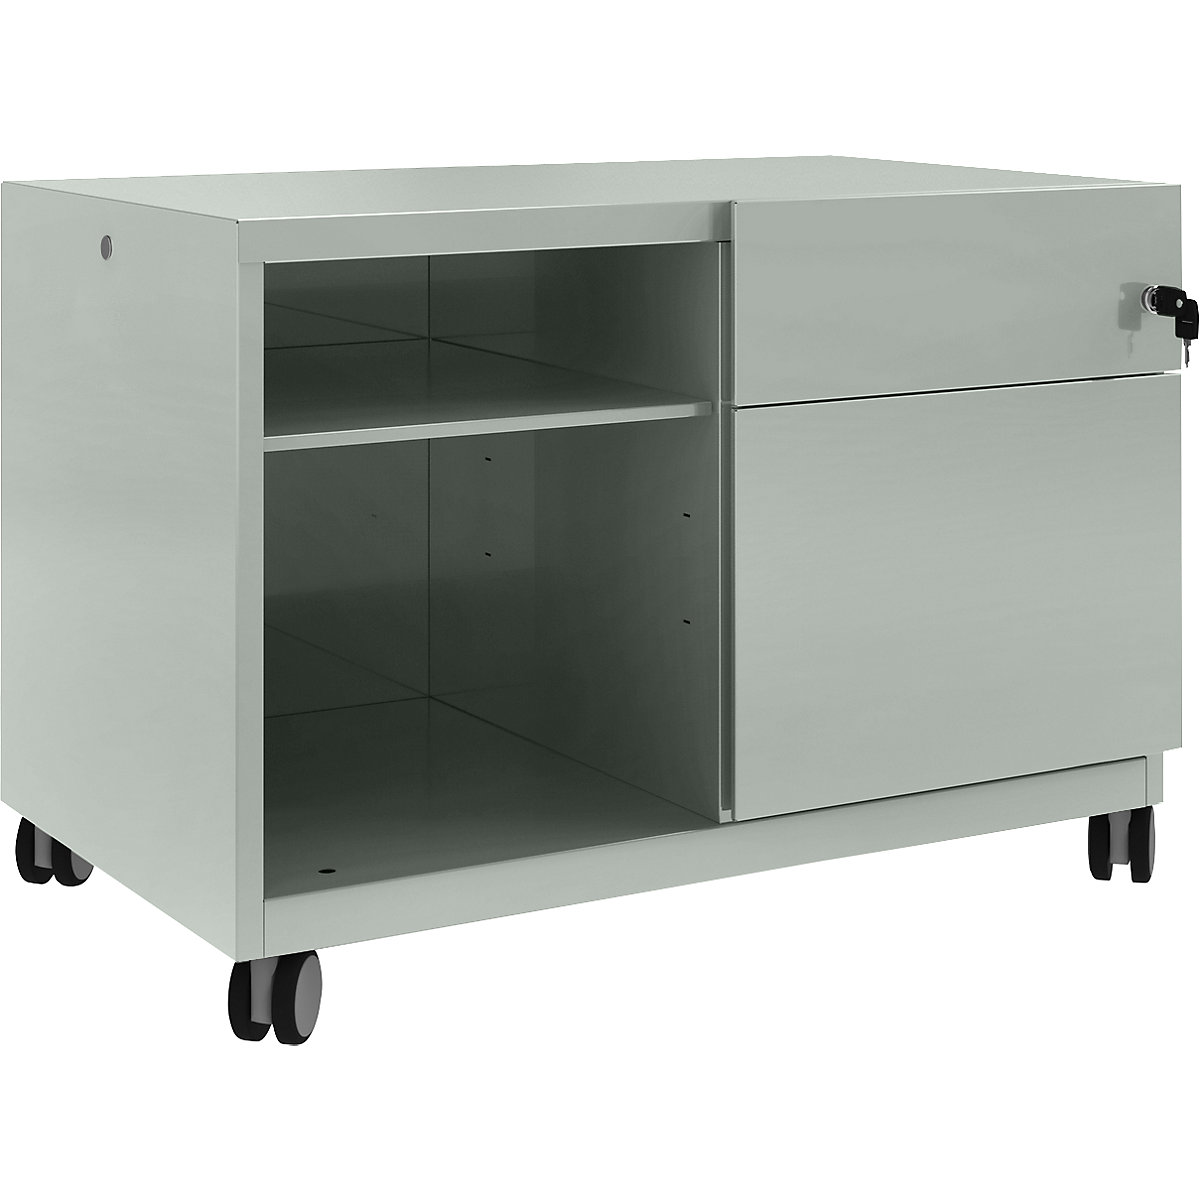 Note™ CADDY, HxBxT 563 x 800 x 490 mm – BISLEY, 1 universal drawer and suspension file drawer on the right, york-29